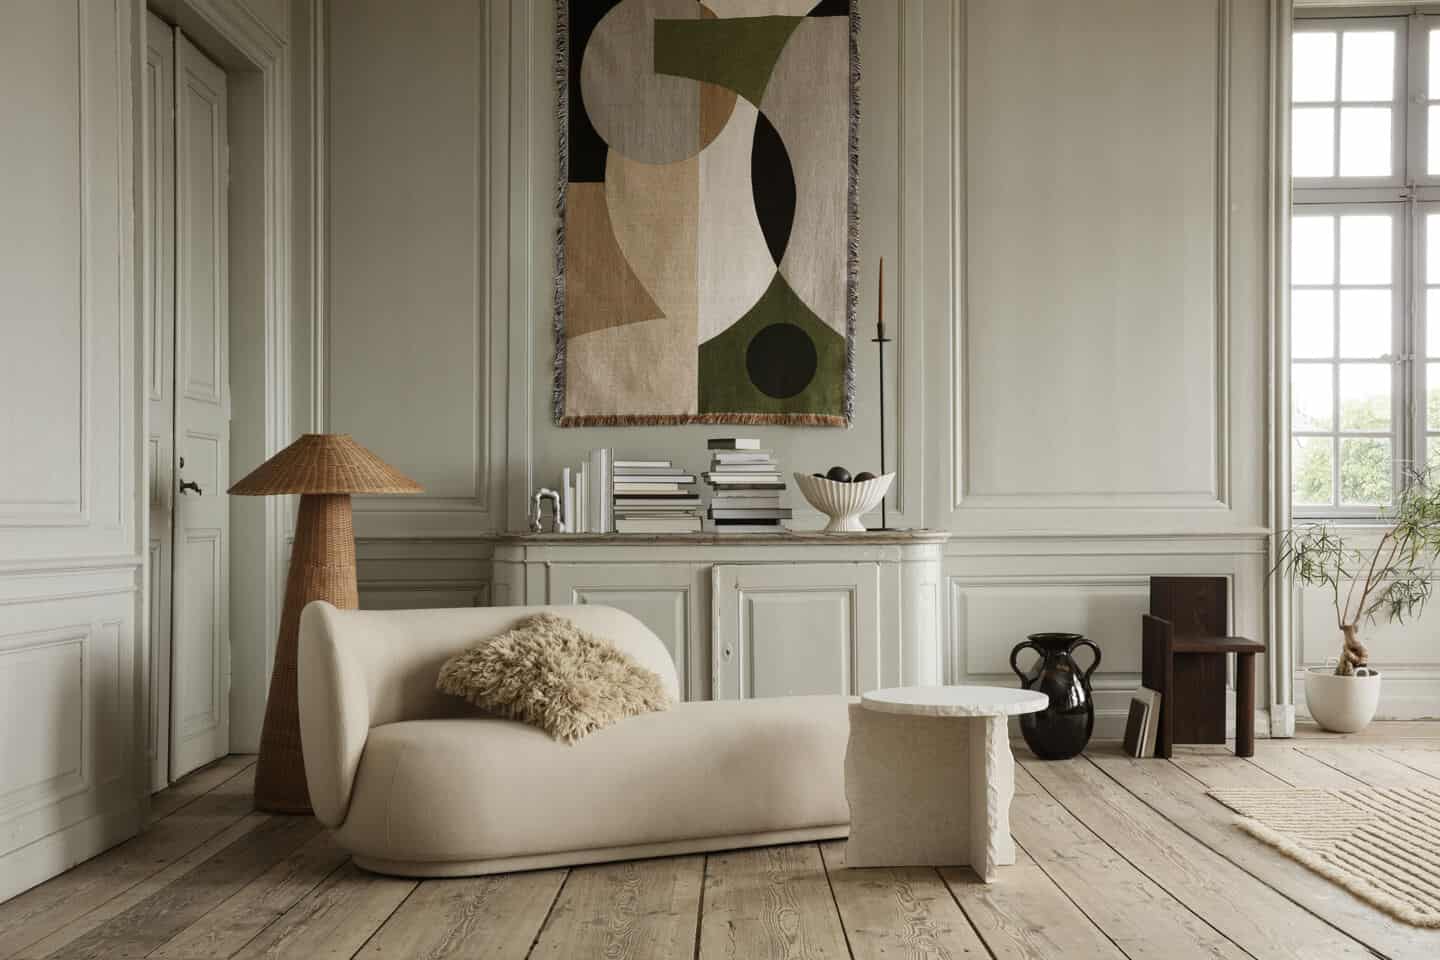 Interior trends for 2022 - Organic Minimalism. Ferm Living furniture in front of panelled walls.